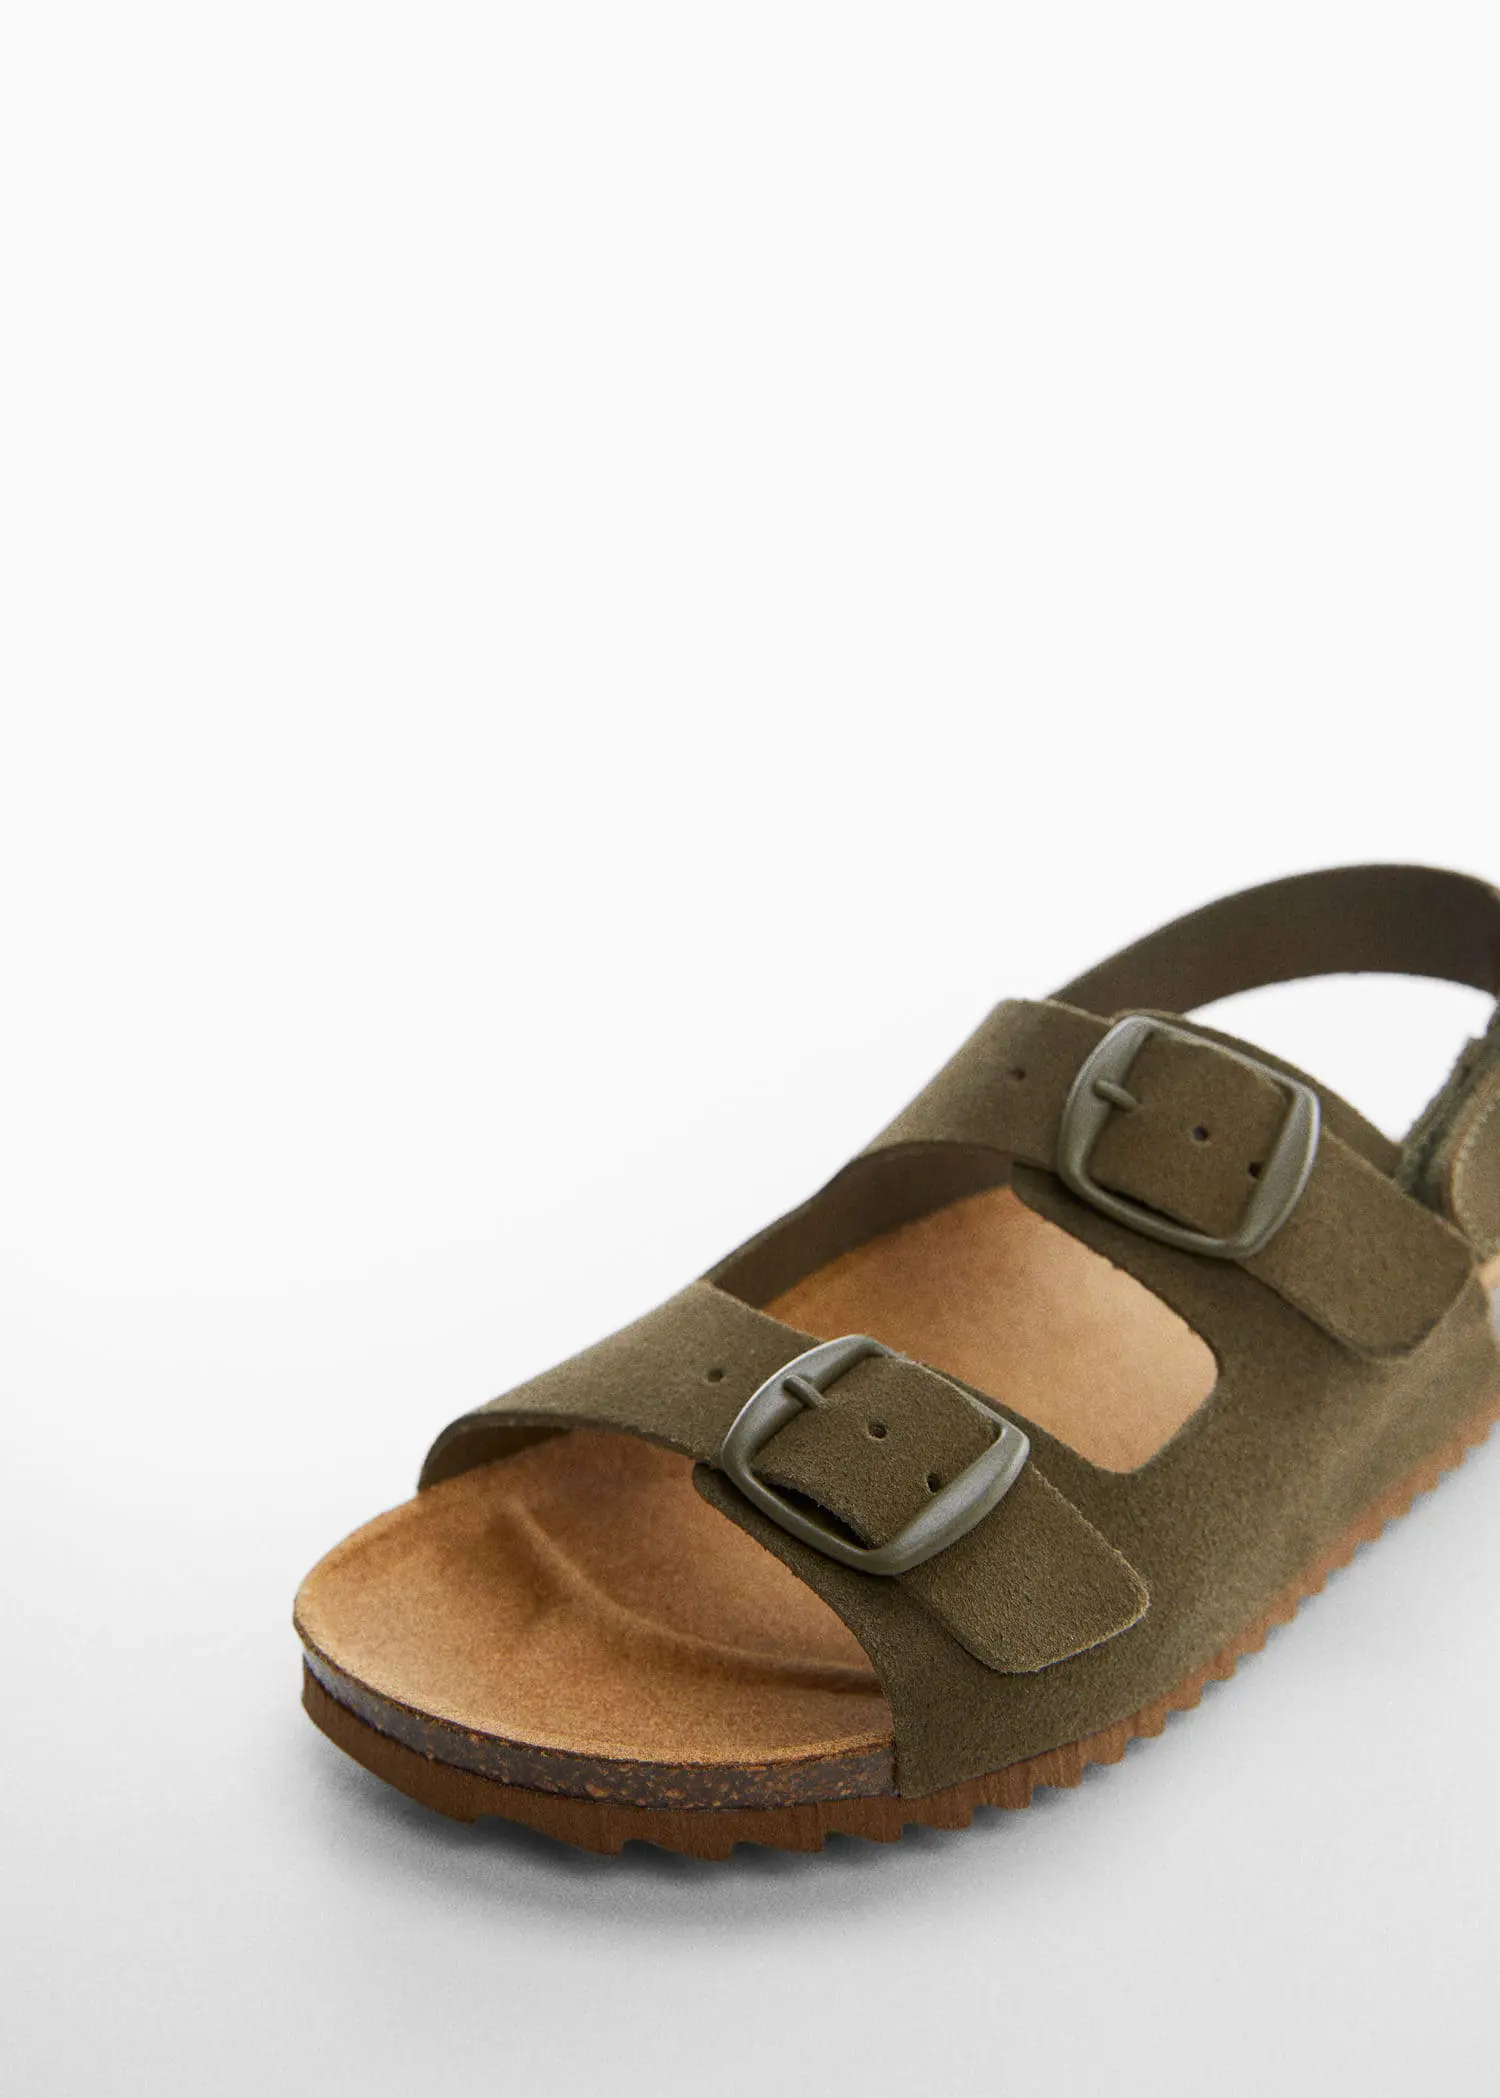 Mango KIDS/ Leather buckle sandal. a close up of a pair of sandals on the ground 